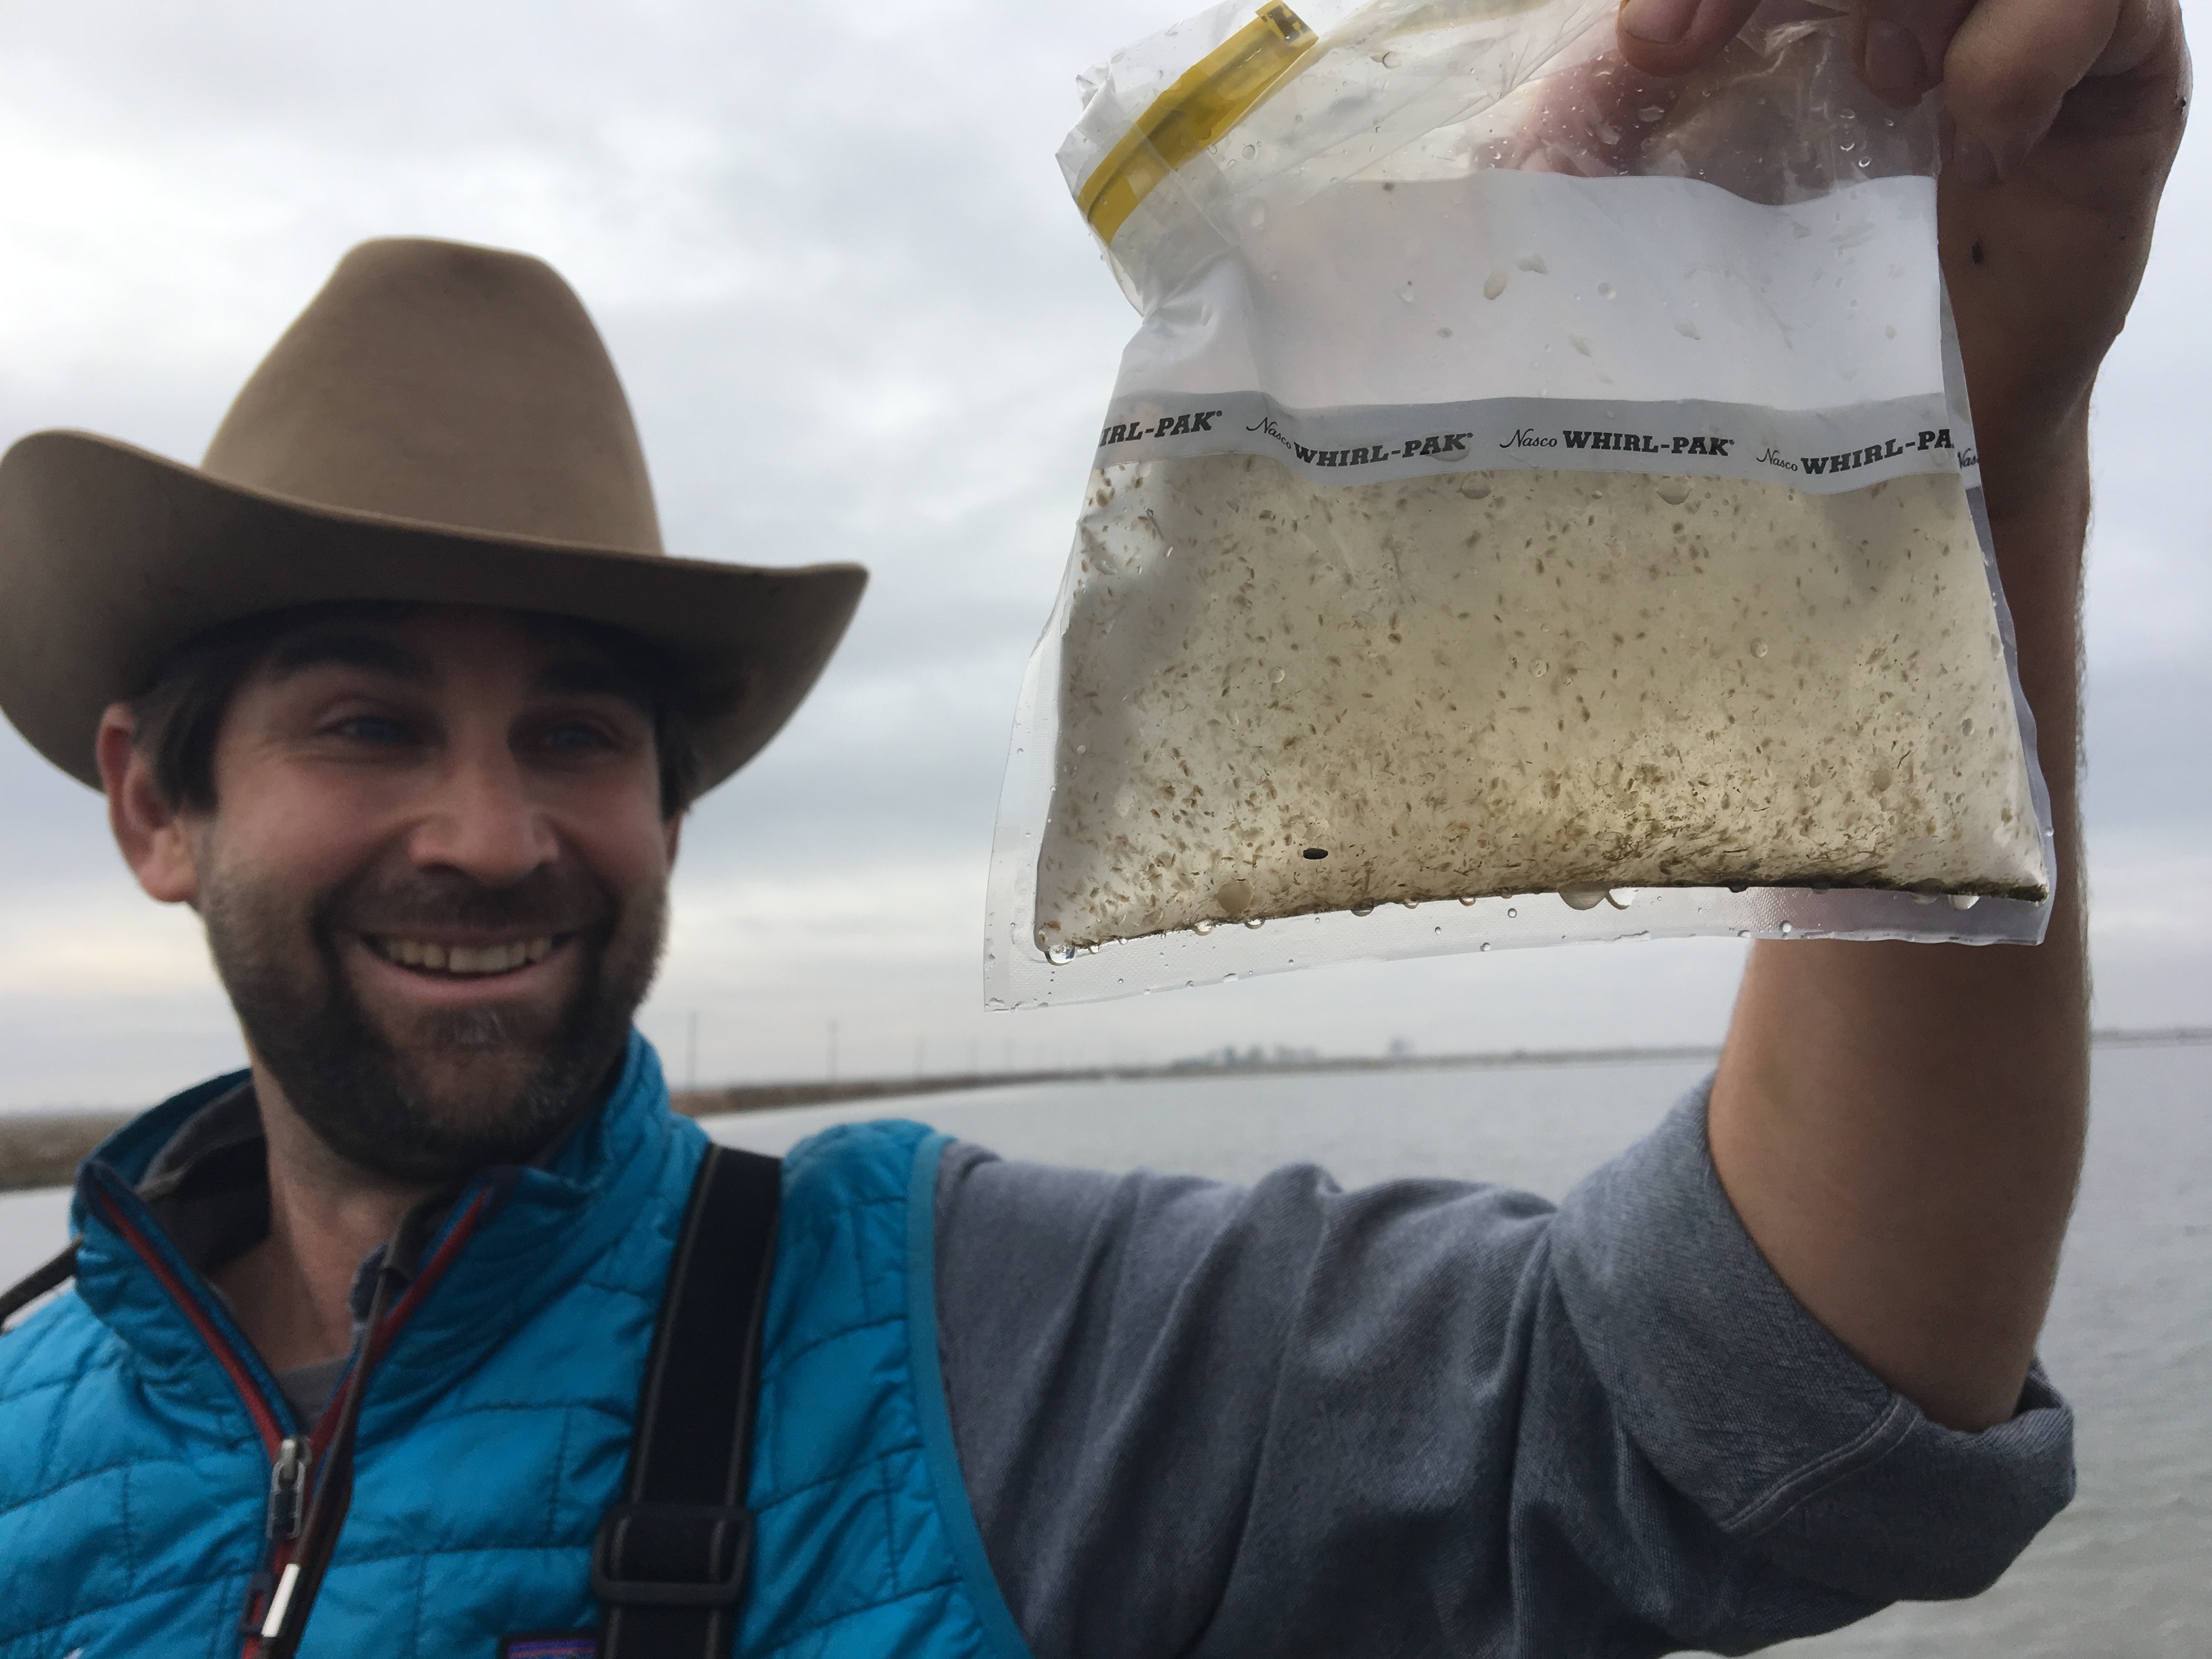 Jacob Katz, with California Trout, says growing bugs in rice fields could be part of the solution for boosting salmon populations in rivers statewide. (Ezra David Romero/Capital Public Radio)